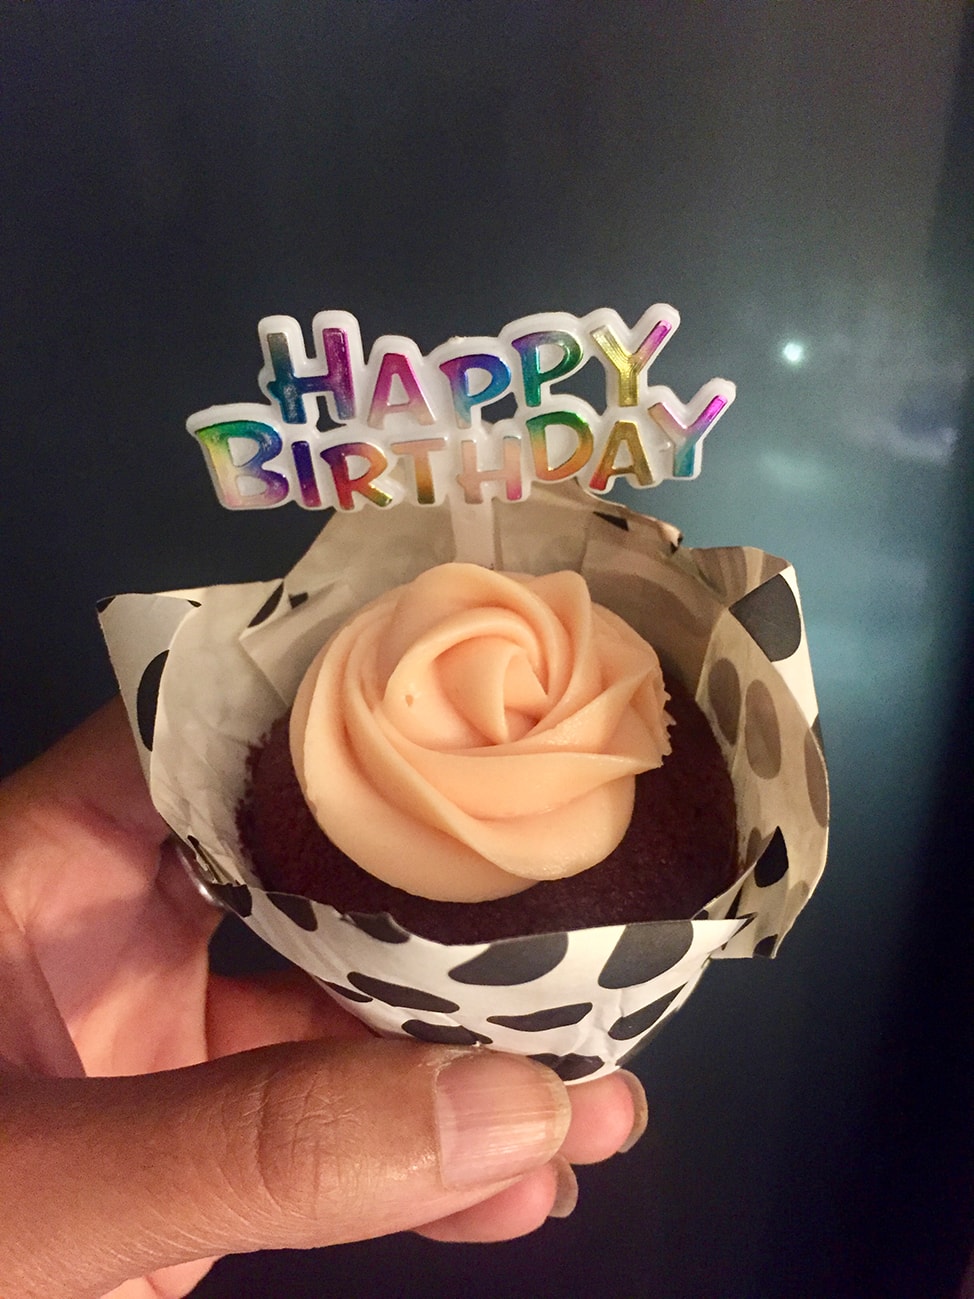 Happy Birthday Cupcake from the Amoy Hotel